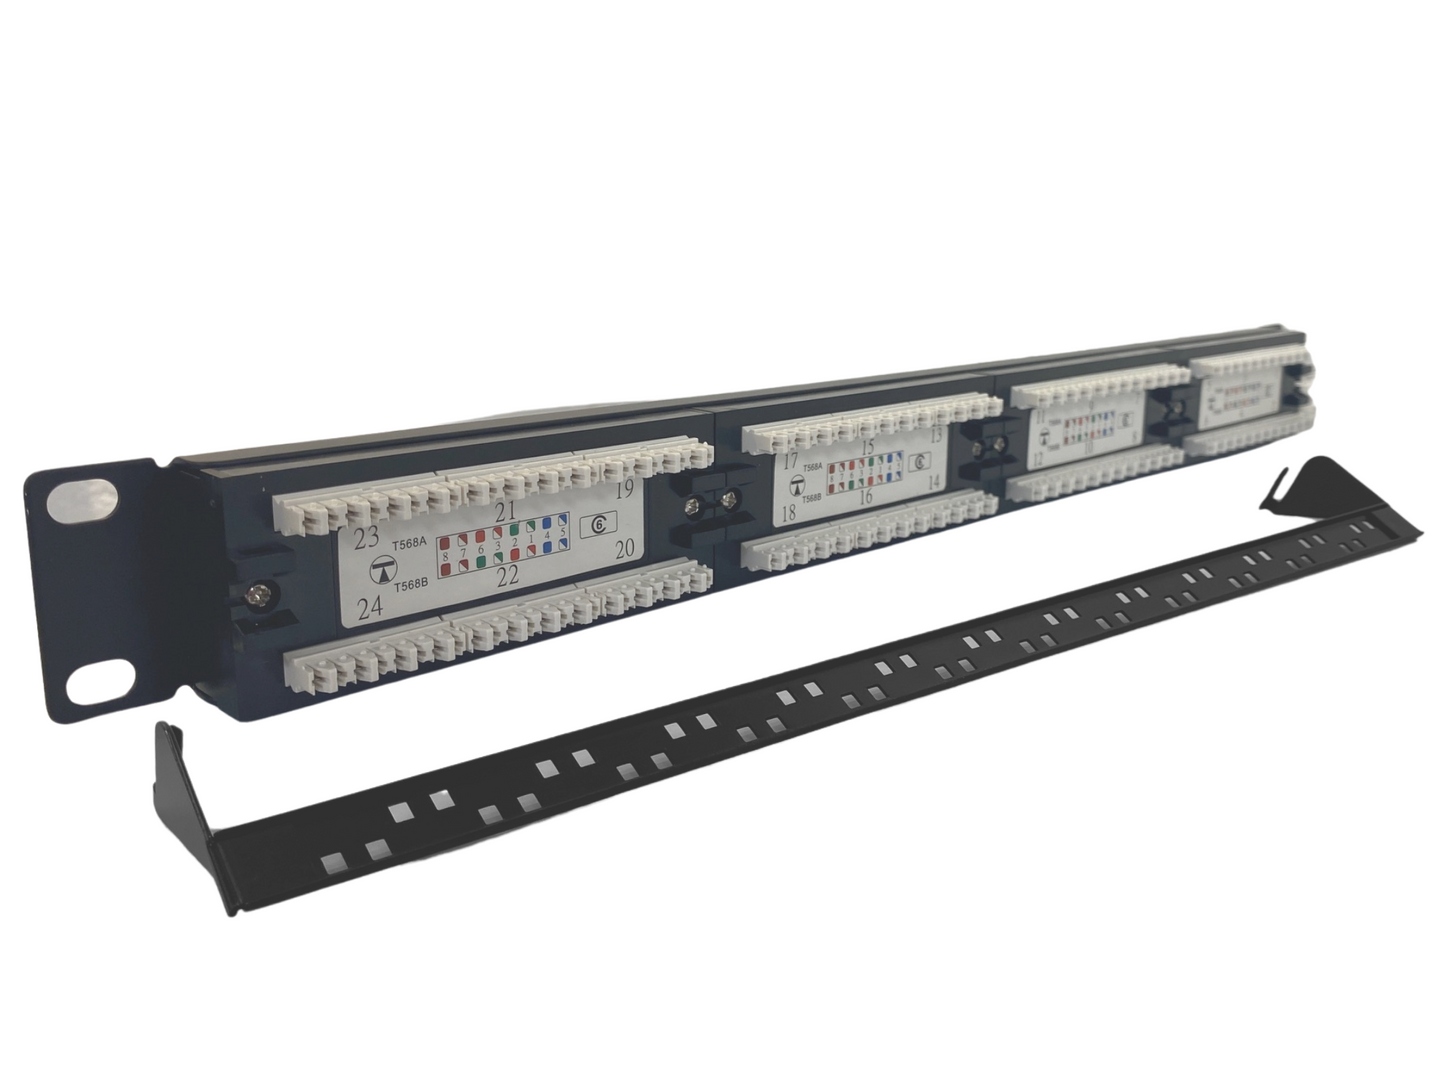 Cat 6 24 Port 1U Patch Panel with Cable Management Cable Ties and Cage Nut Set